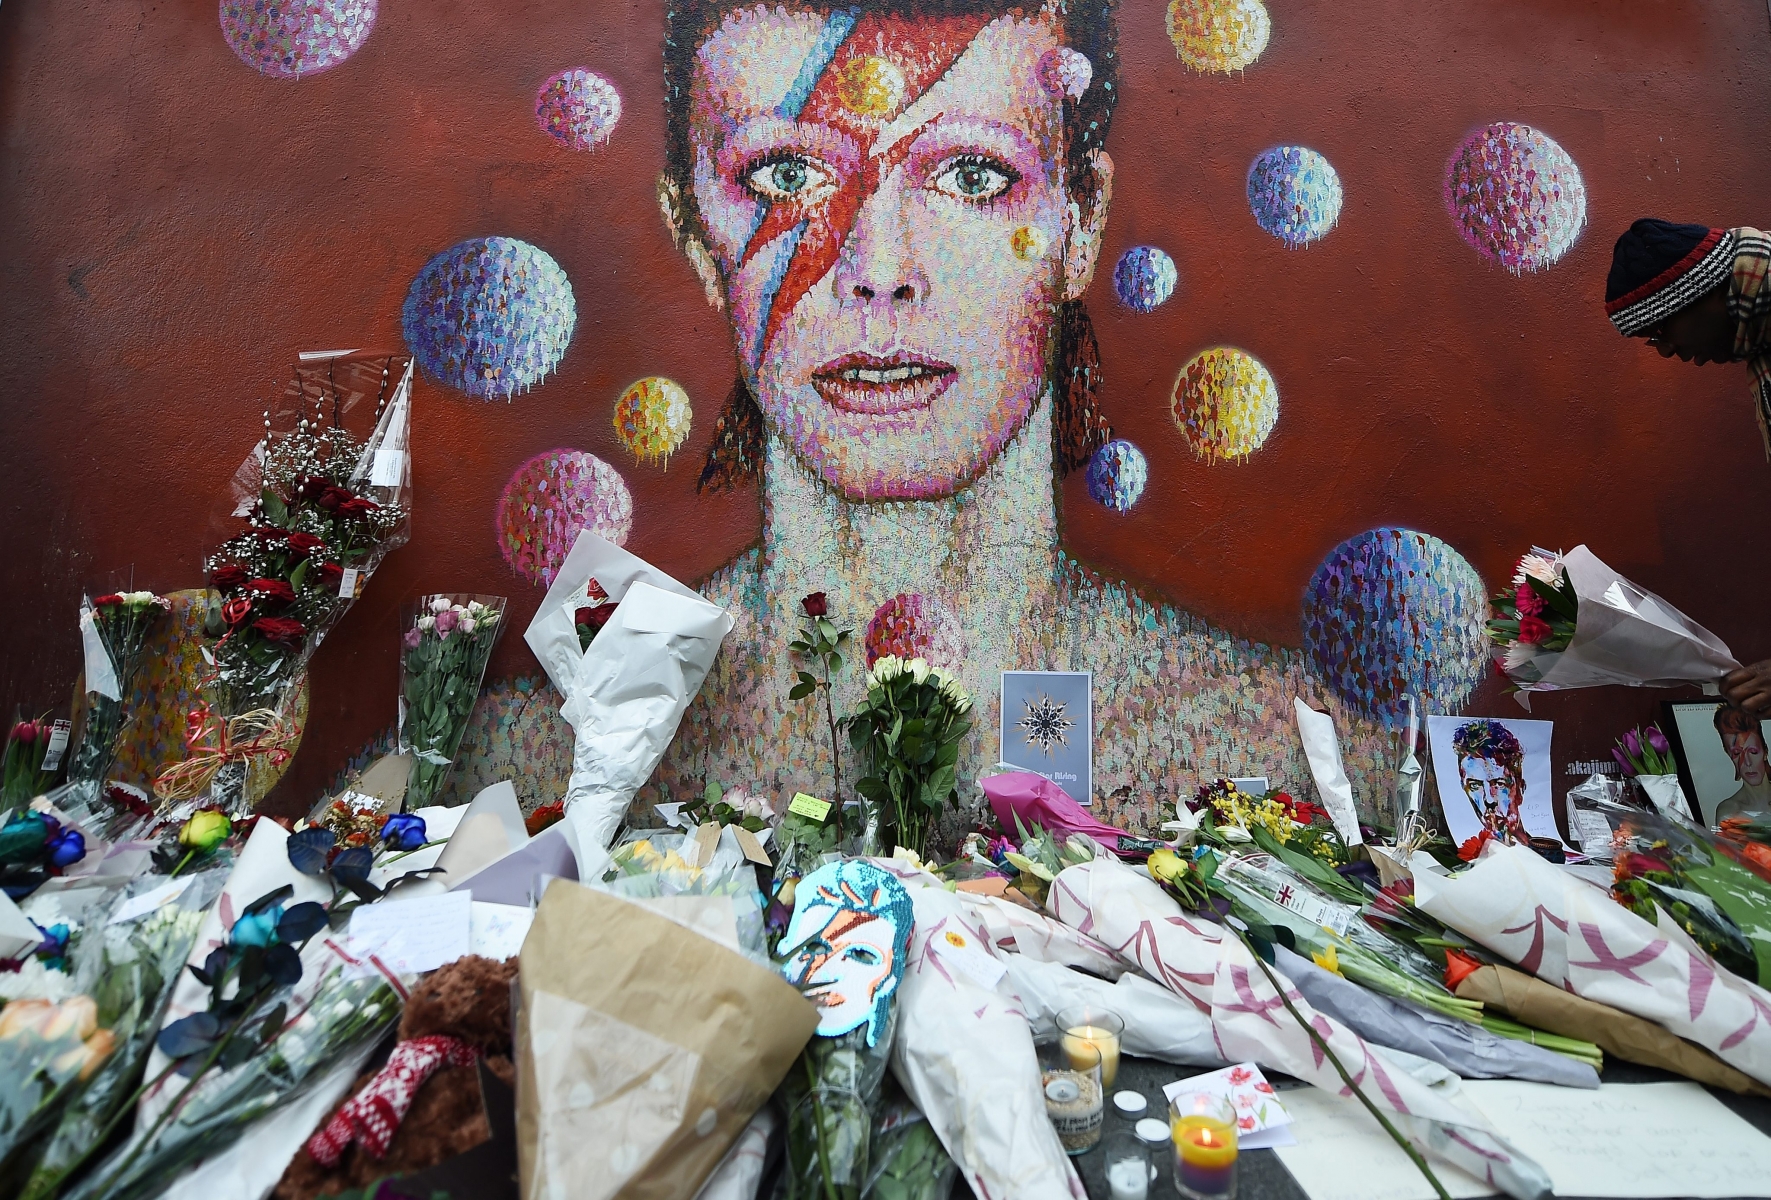 epa05097191 Flowers at a tribute mural for British singer David Bowie in Brixton, birth place of the late David Bowie in London, Britain, 11 January 2016.  Well-wishers have flocked to the Bowie mural to pay their respects following the announcement of his death.  EPA/ANDY RAIN